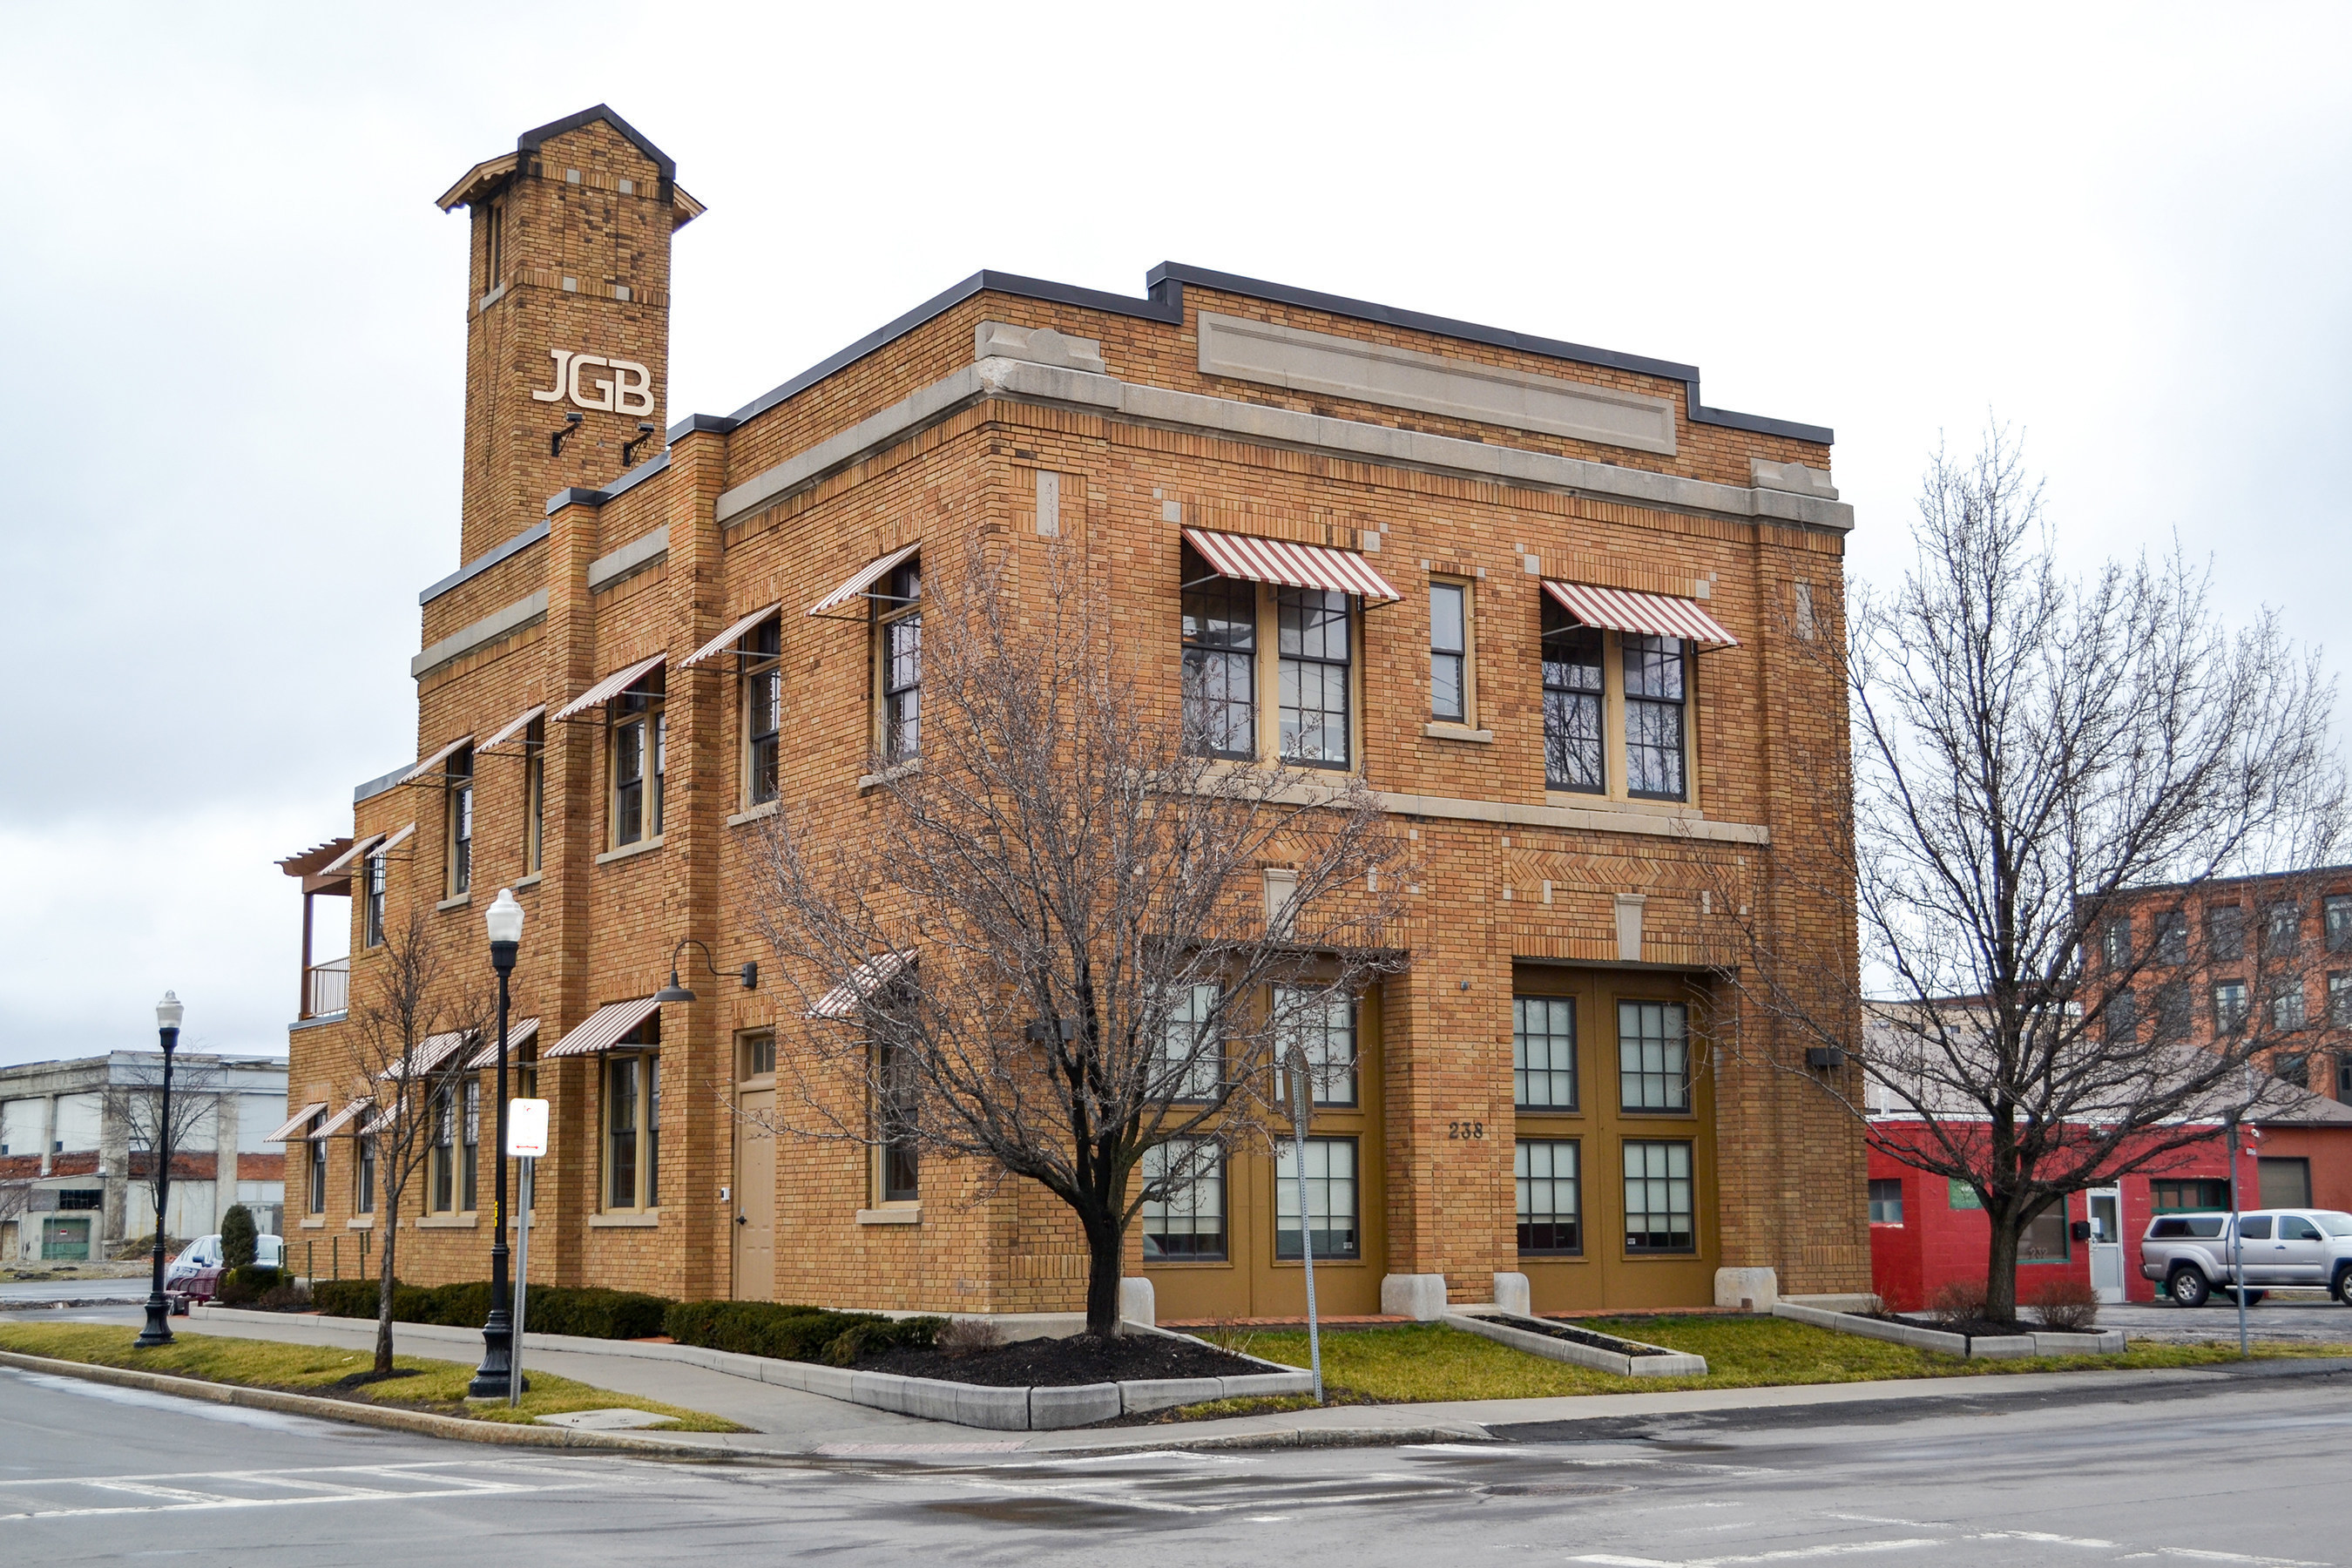 Bankers Healthcare Group has expanded its offices in Syracuse, New York and leased one of the most unique workspaces in the city: the historic Engine 14 fire station located at 238 Division Street.